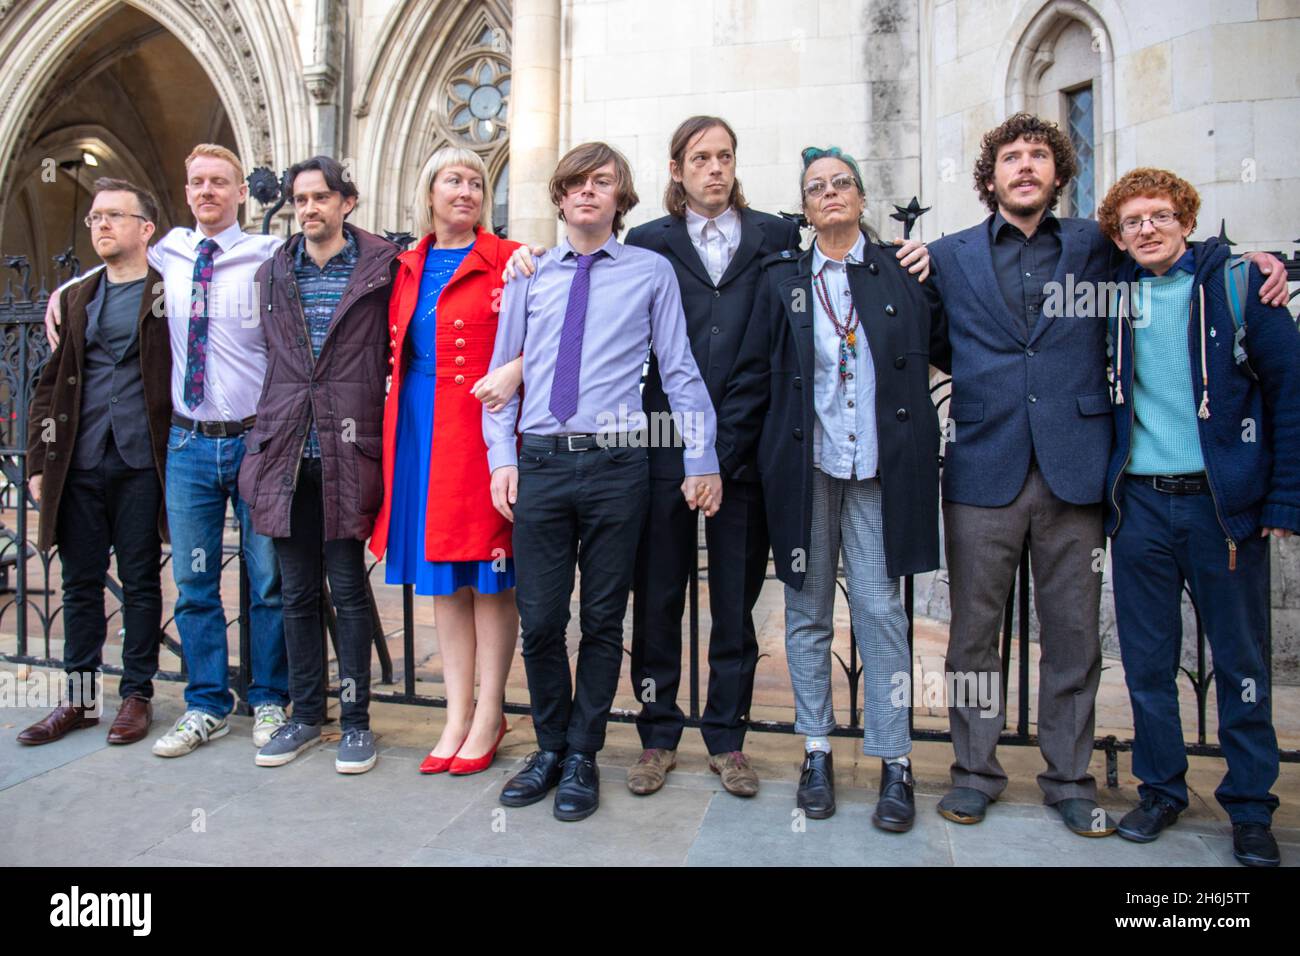 London, England, UK 16 November 2021 Climate Change activists from Insulate Britain appear at the Royal Courts of Justice allegedly breaking injunctions designed to restrict disruptive protest. The activists face jail if found guilty. Credit: Denise Laura Baker/Alamy Live News Stock Photo